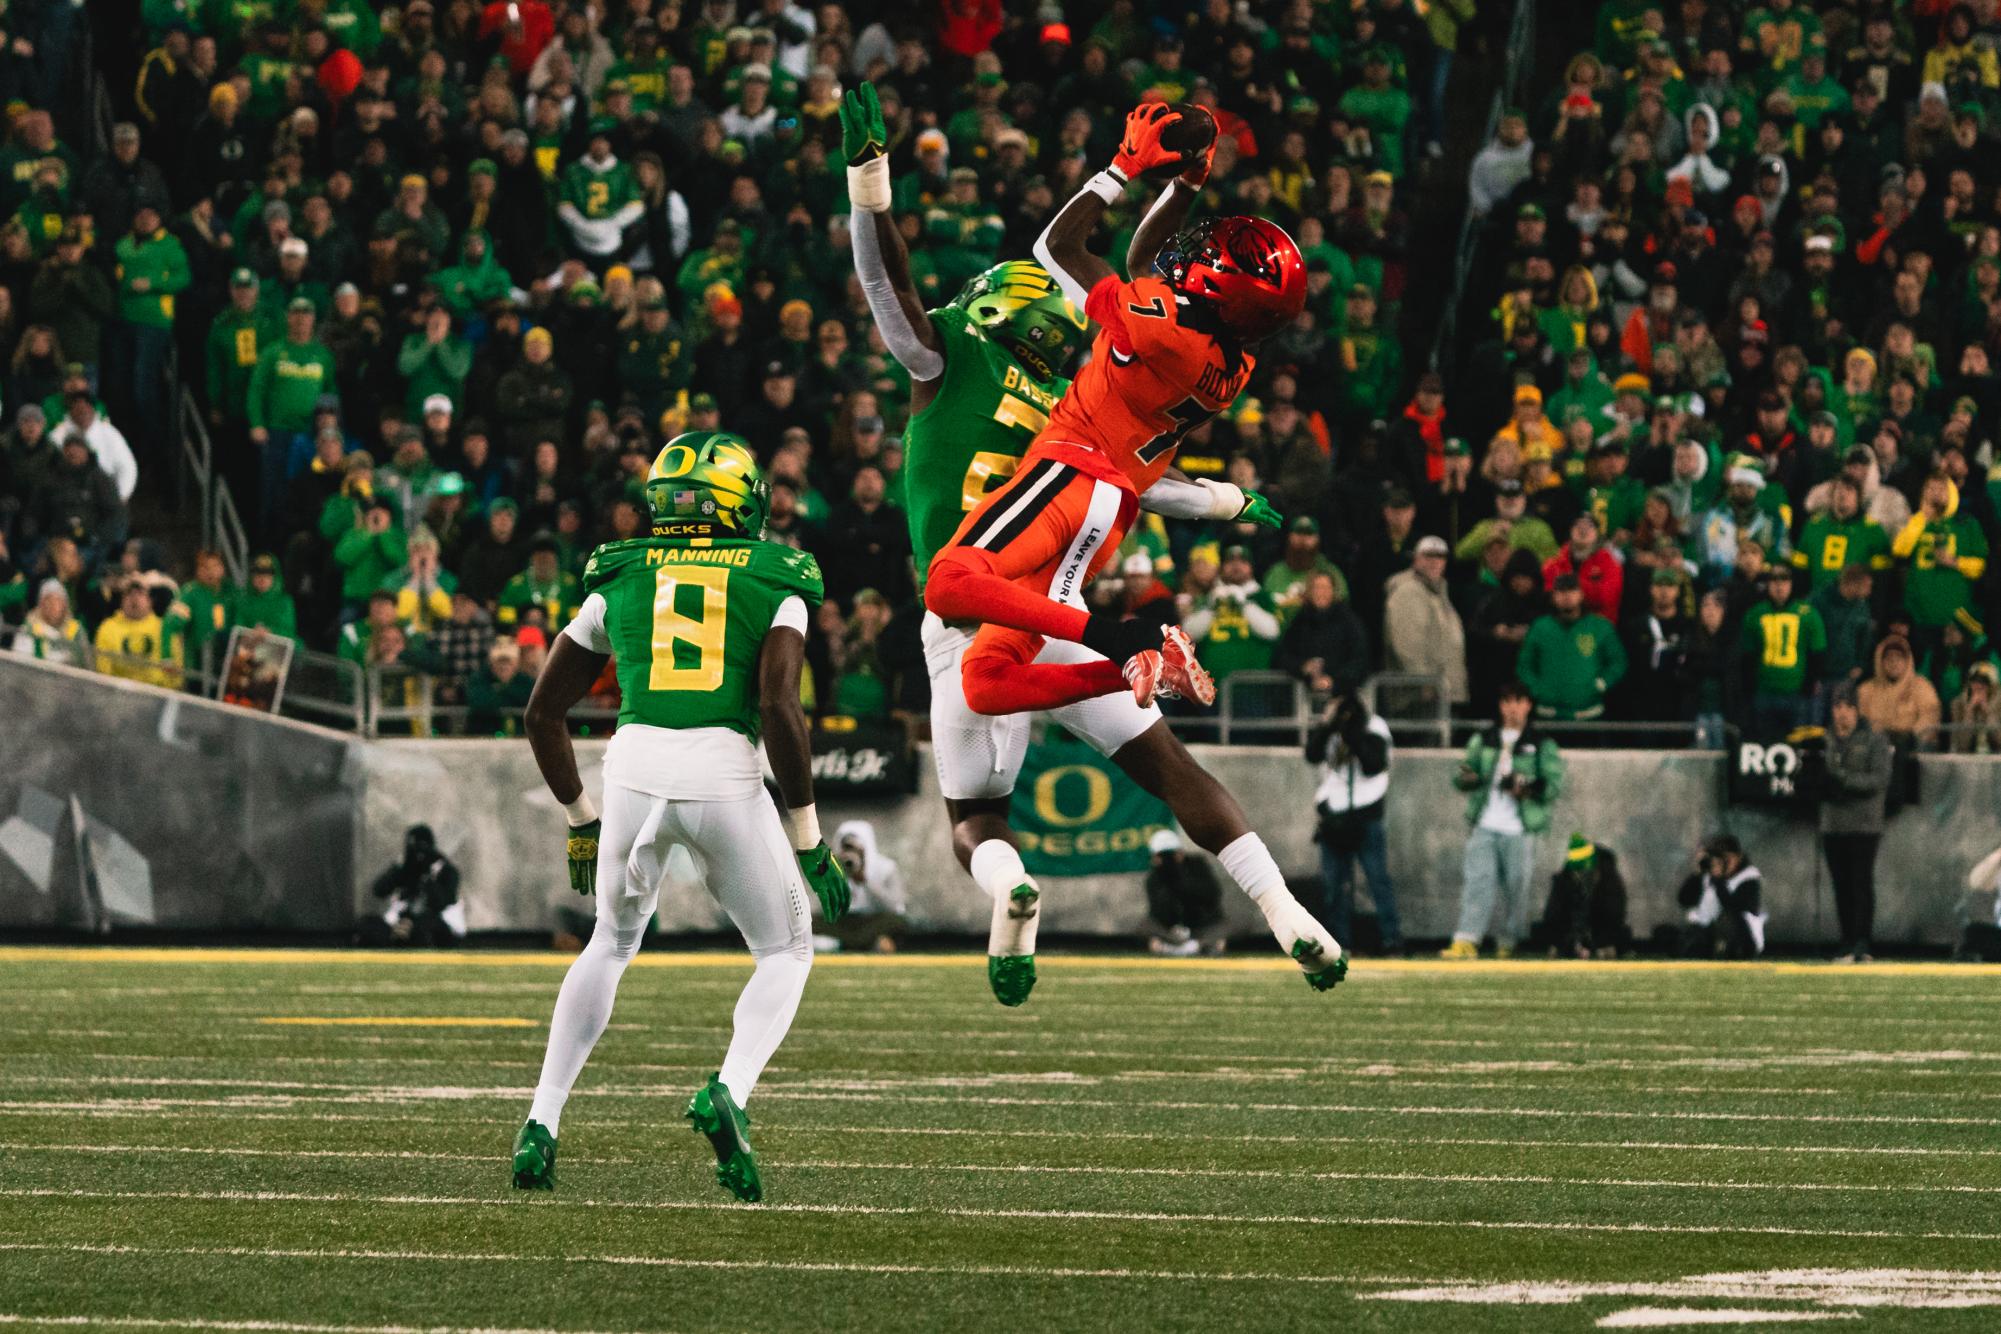 Silas Bolden high-points a pass for a catch against the University of Oregon at Autzen Stadium in Eugene on Nov. 24.